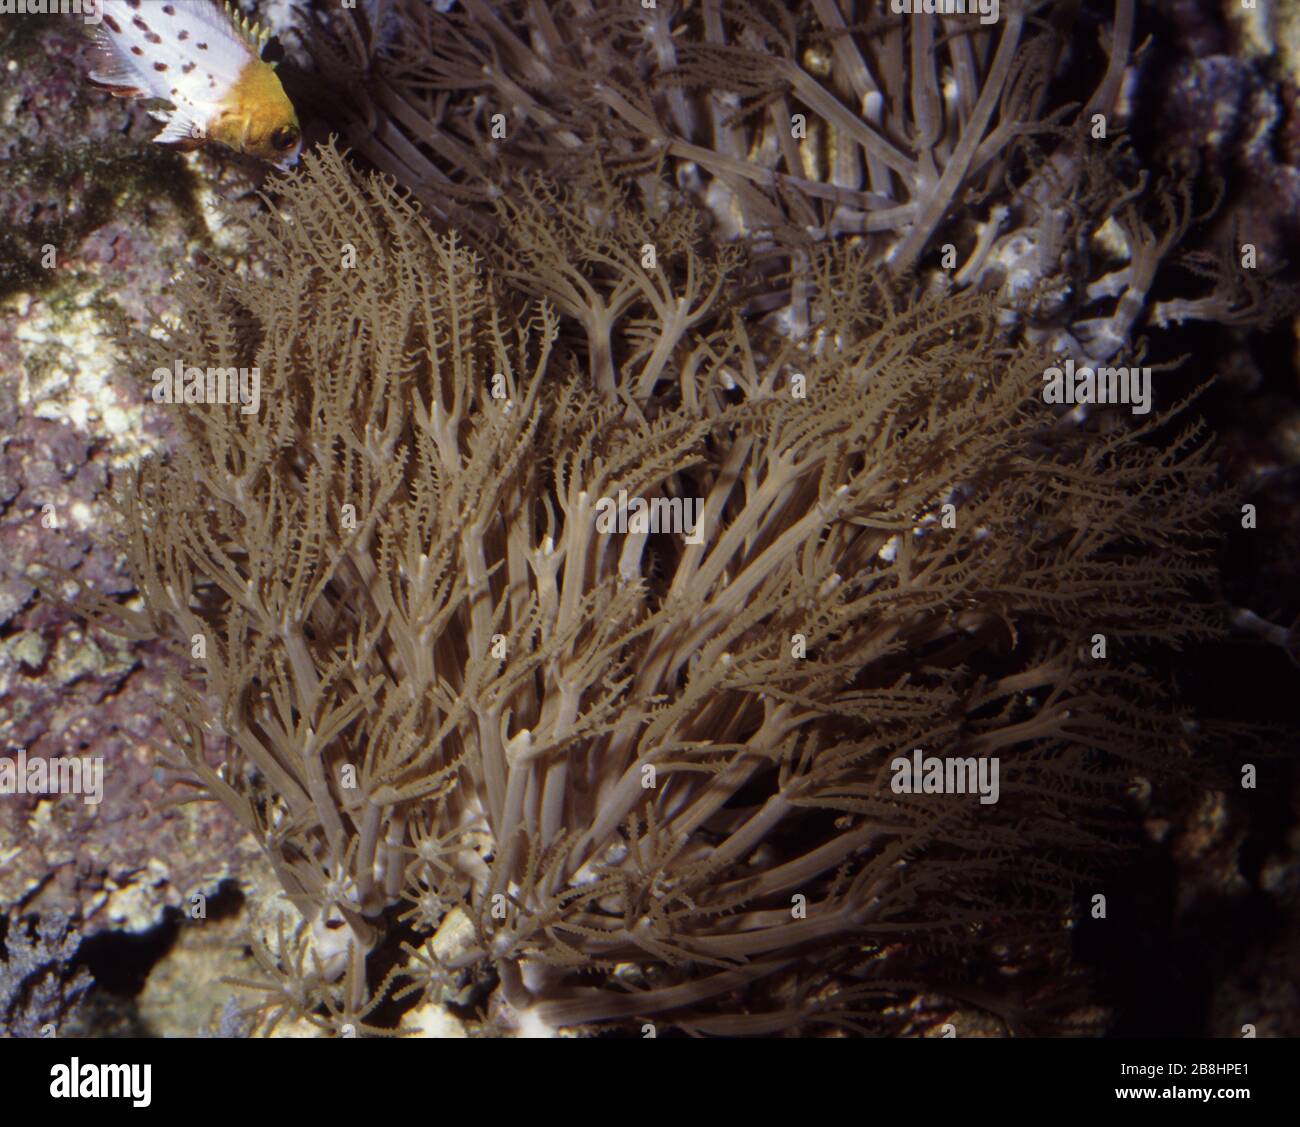 Waving hand coral, Anthelia sp. Stock Photo